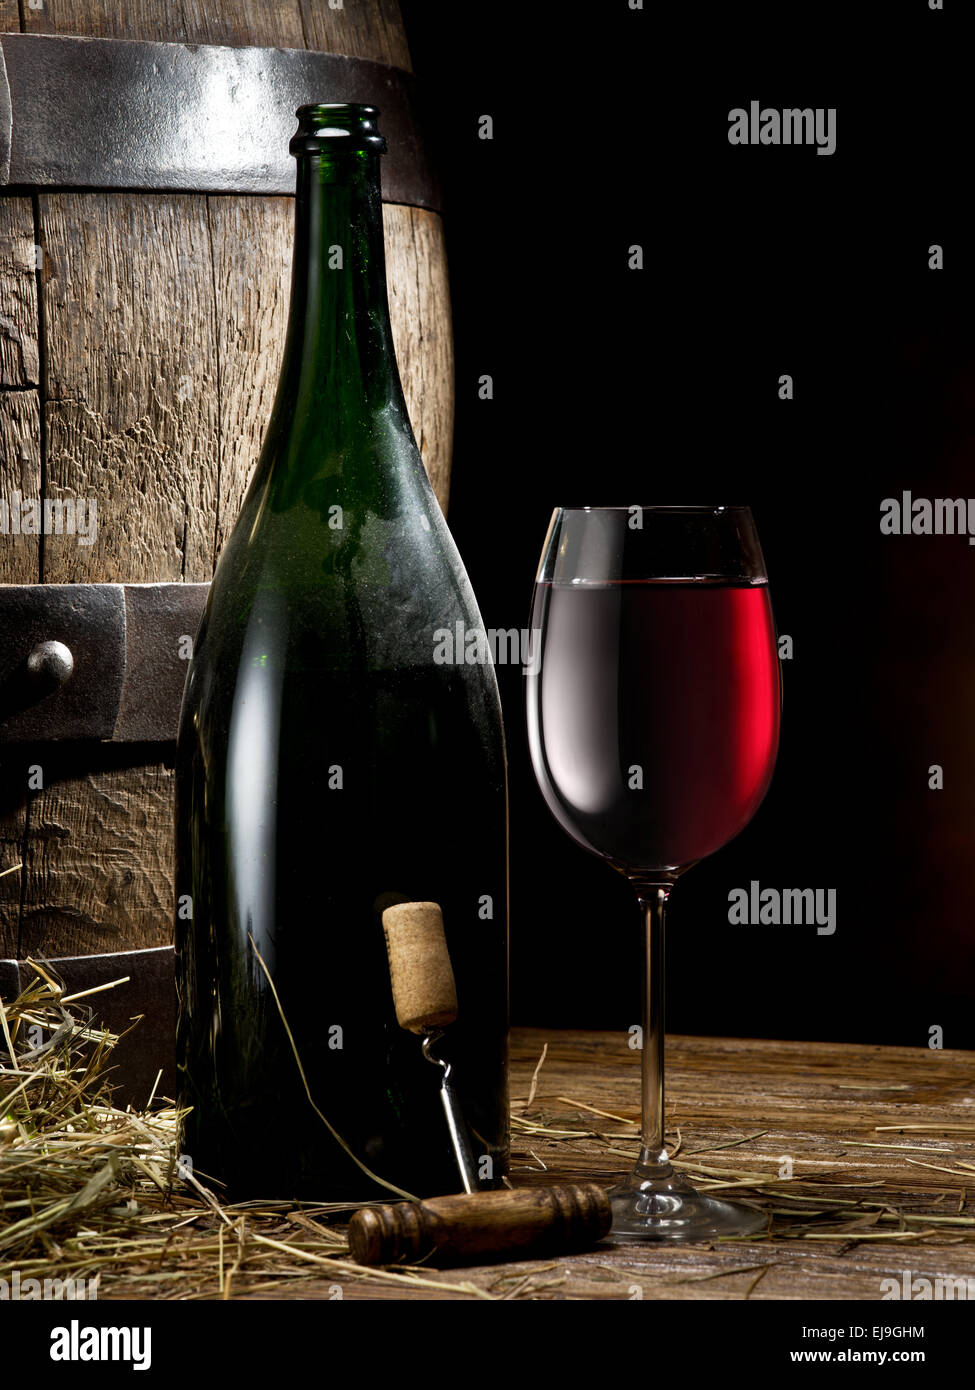 Still-life with glass of wine, bottle and barrel on the table in the cellar. Stock Photo